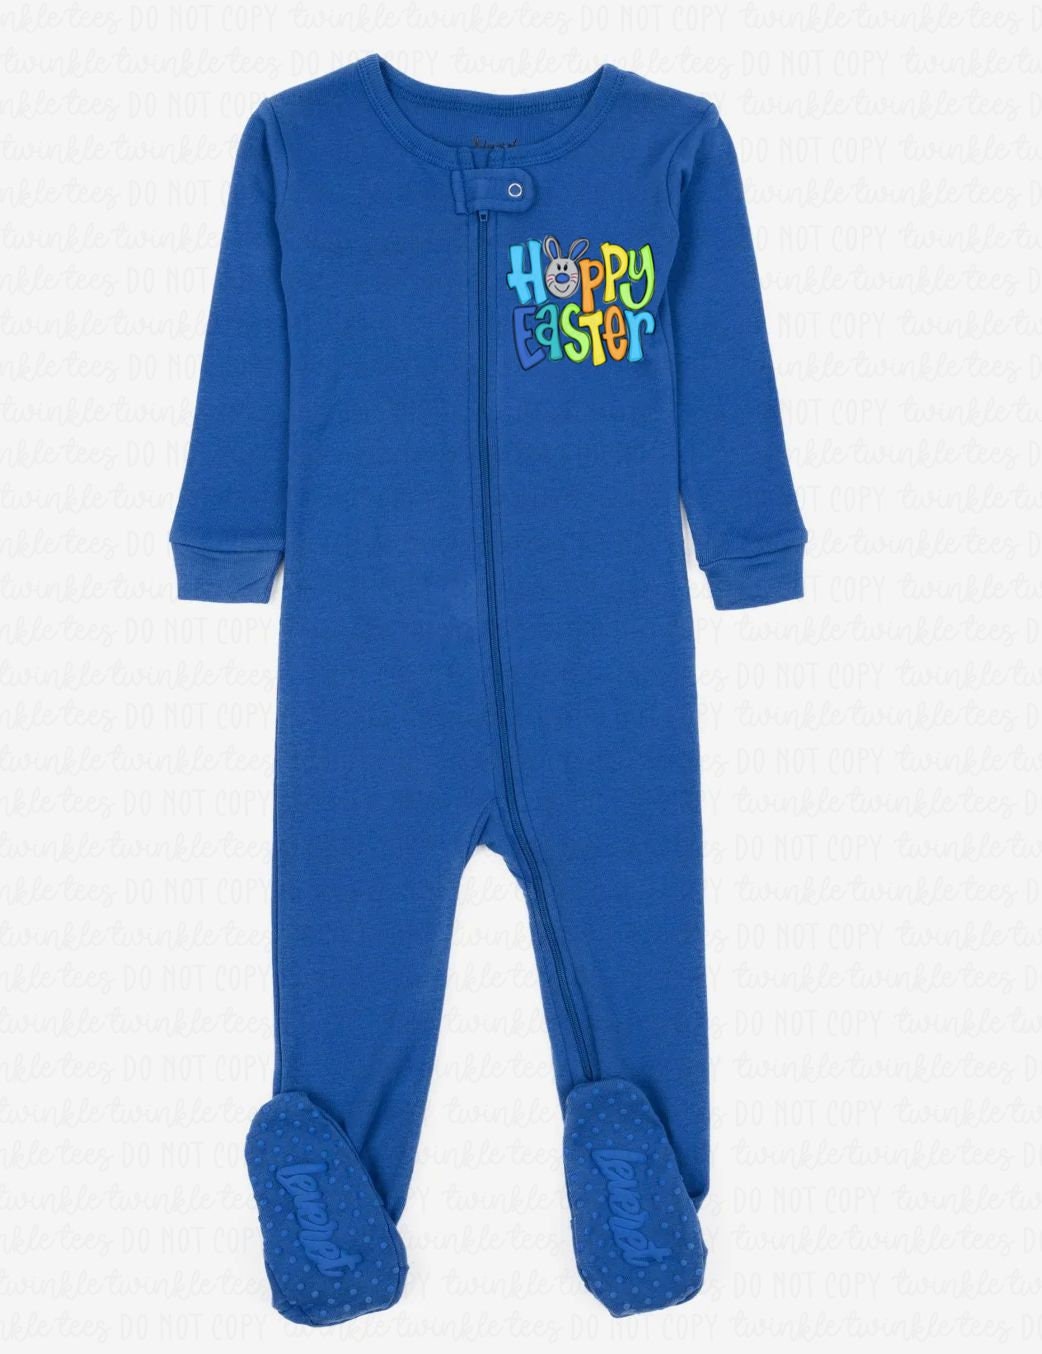 Happy Easter Solid Royal Blue Pajamas, easter pajamas for the family, matching easter pajamas